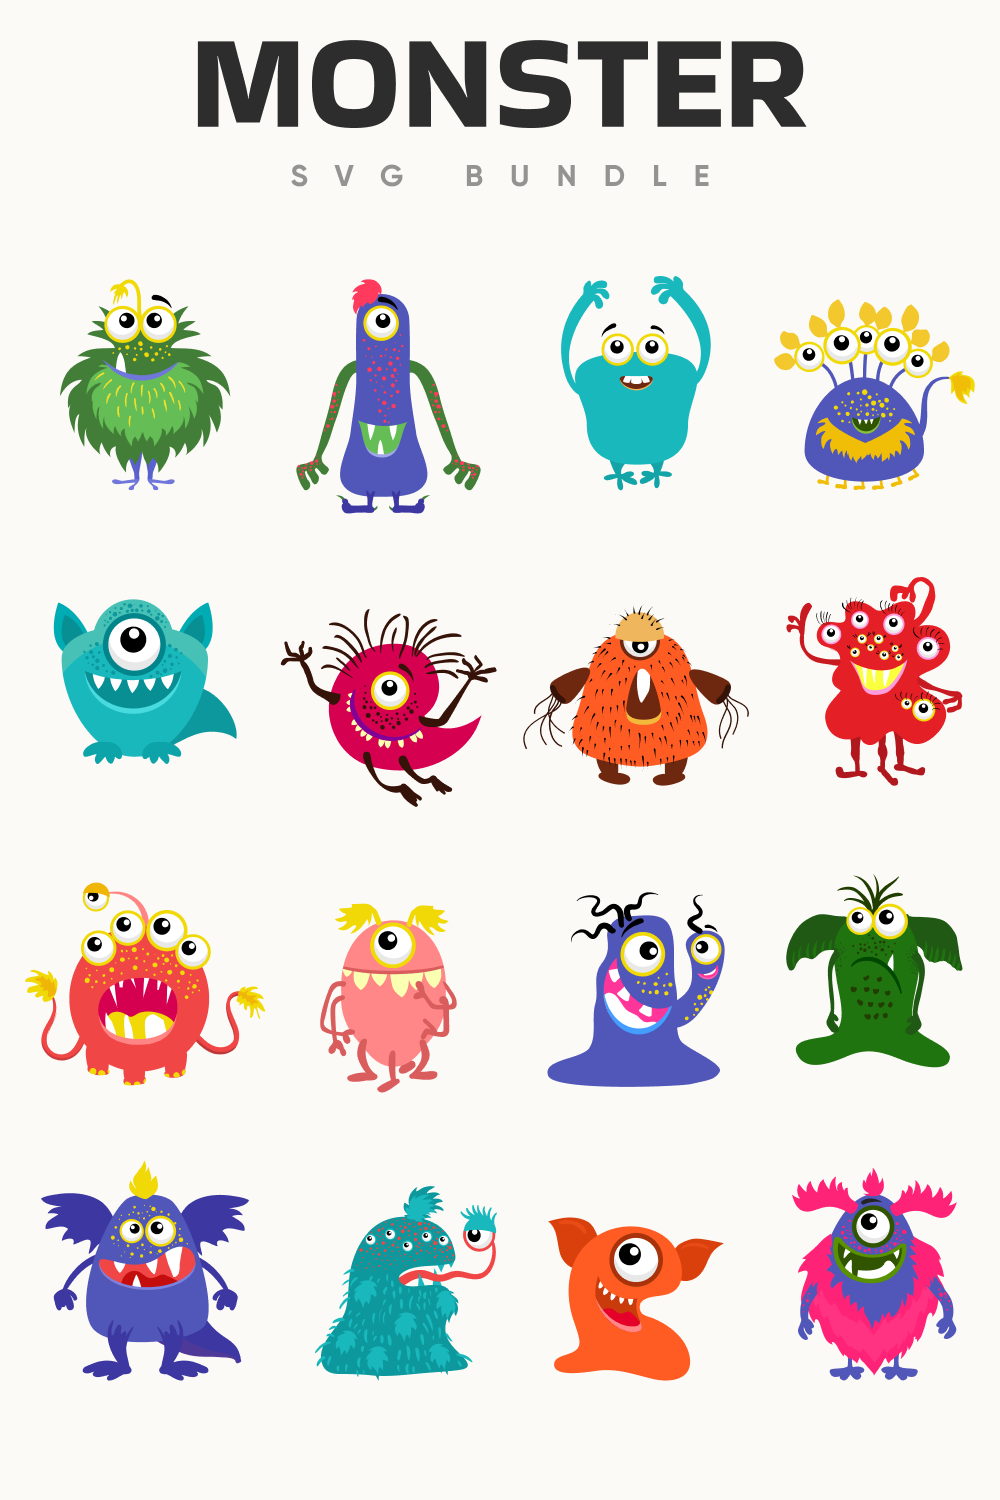 Big colorful monster collection.